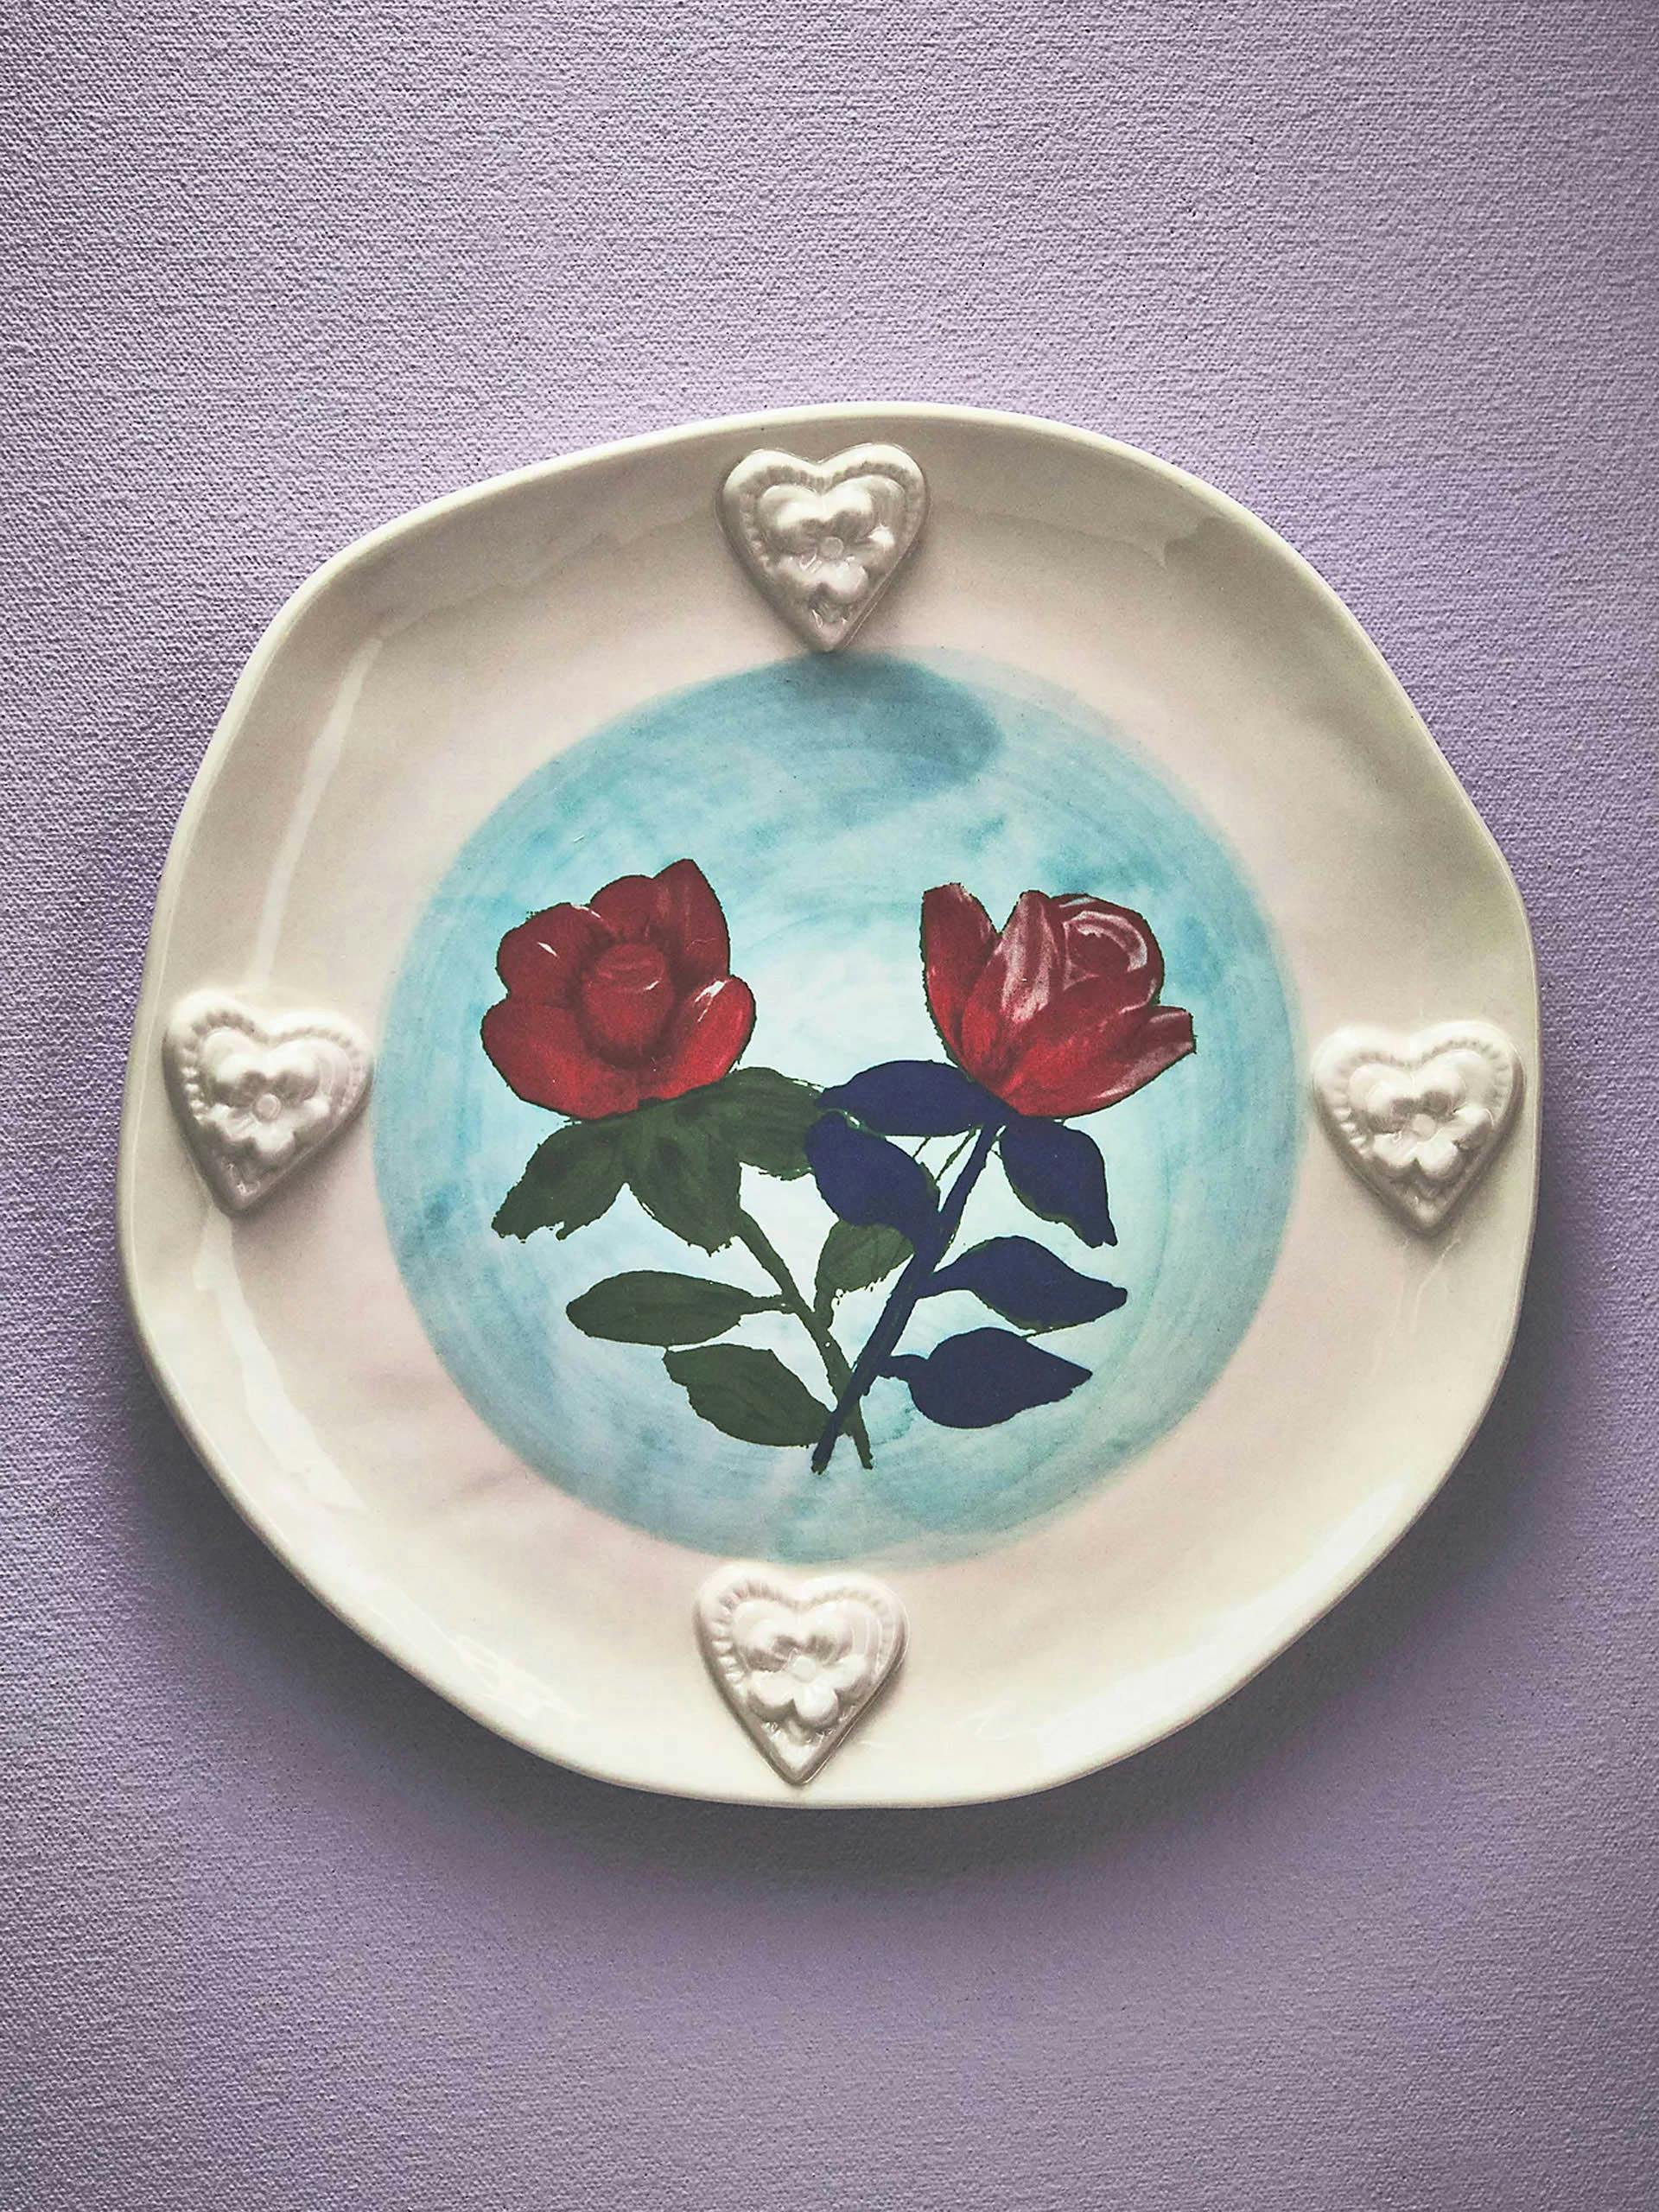 Hand-painted floral dessert plate